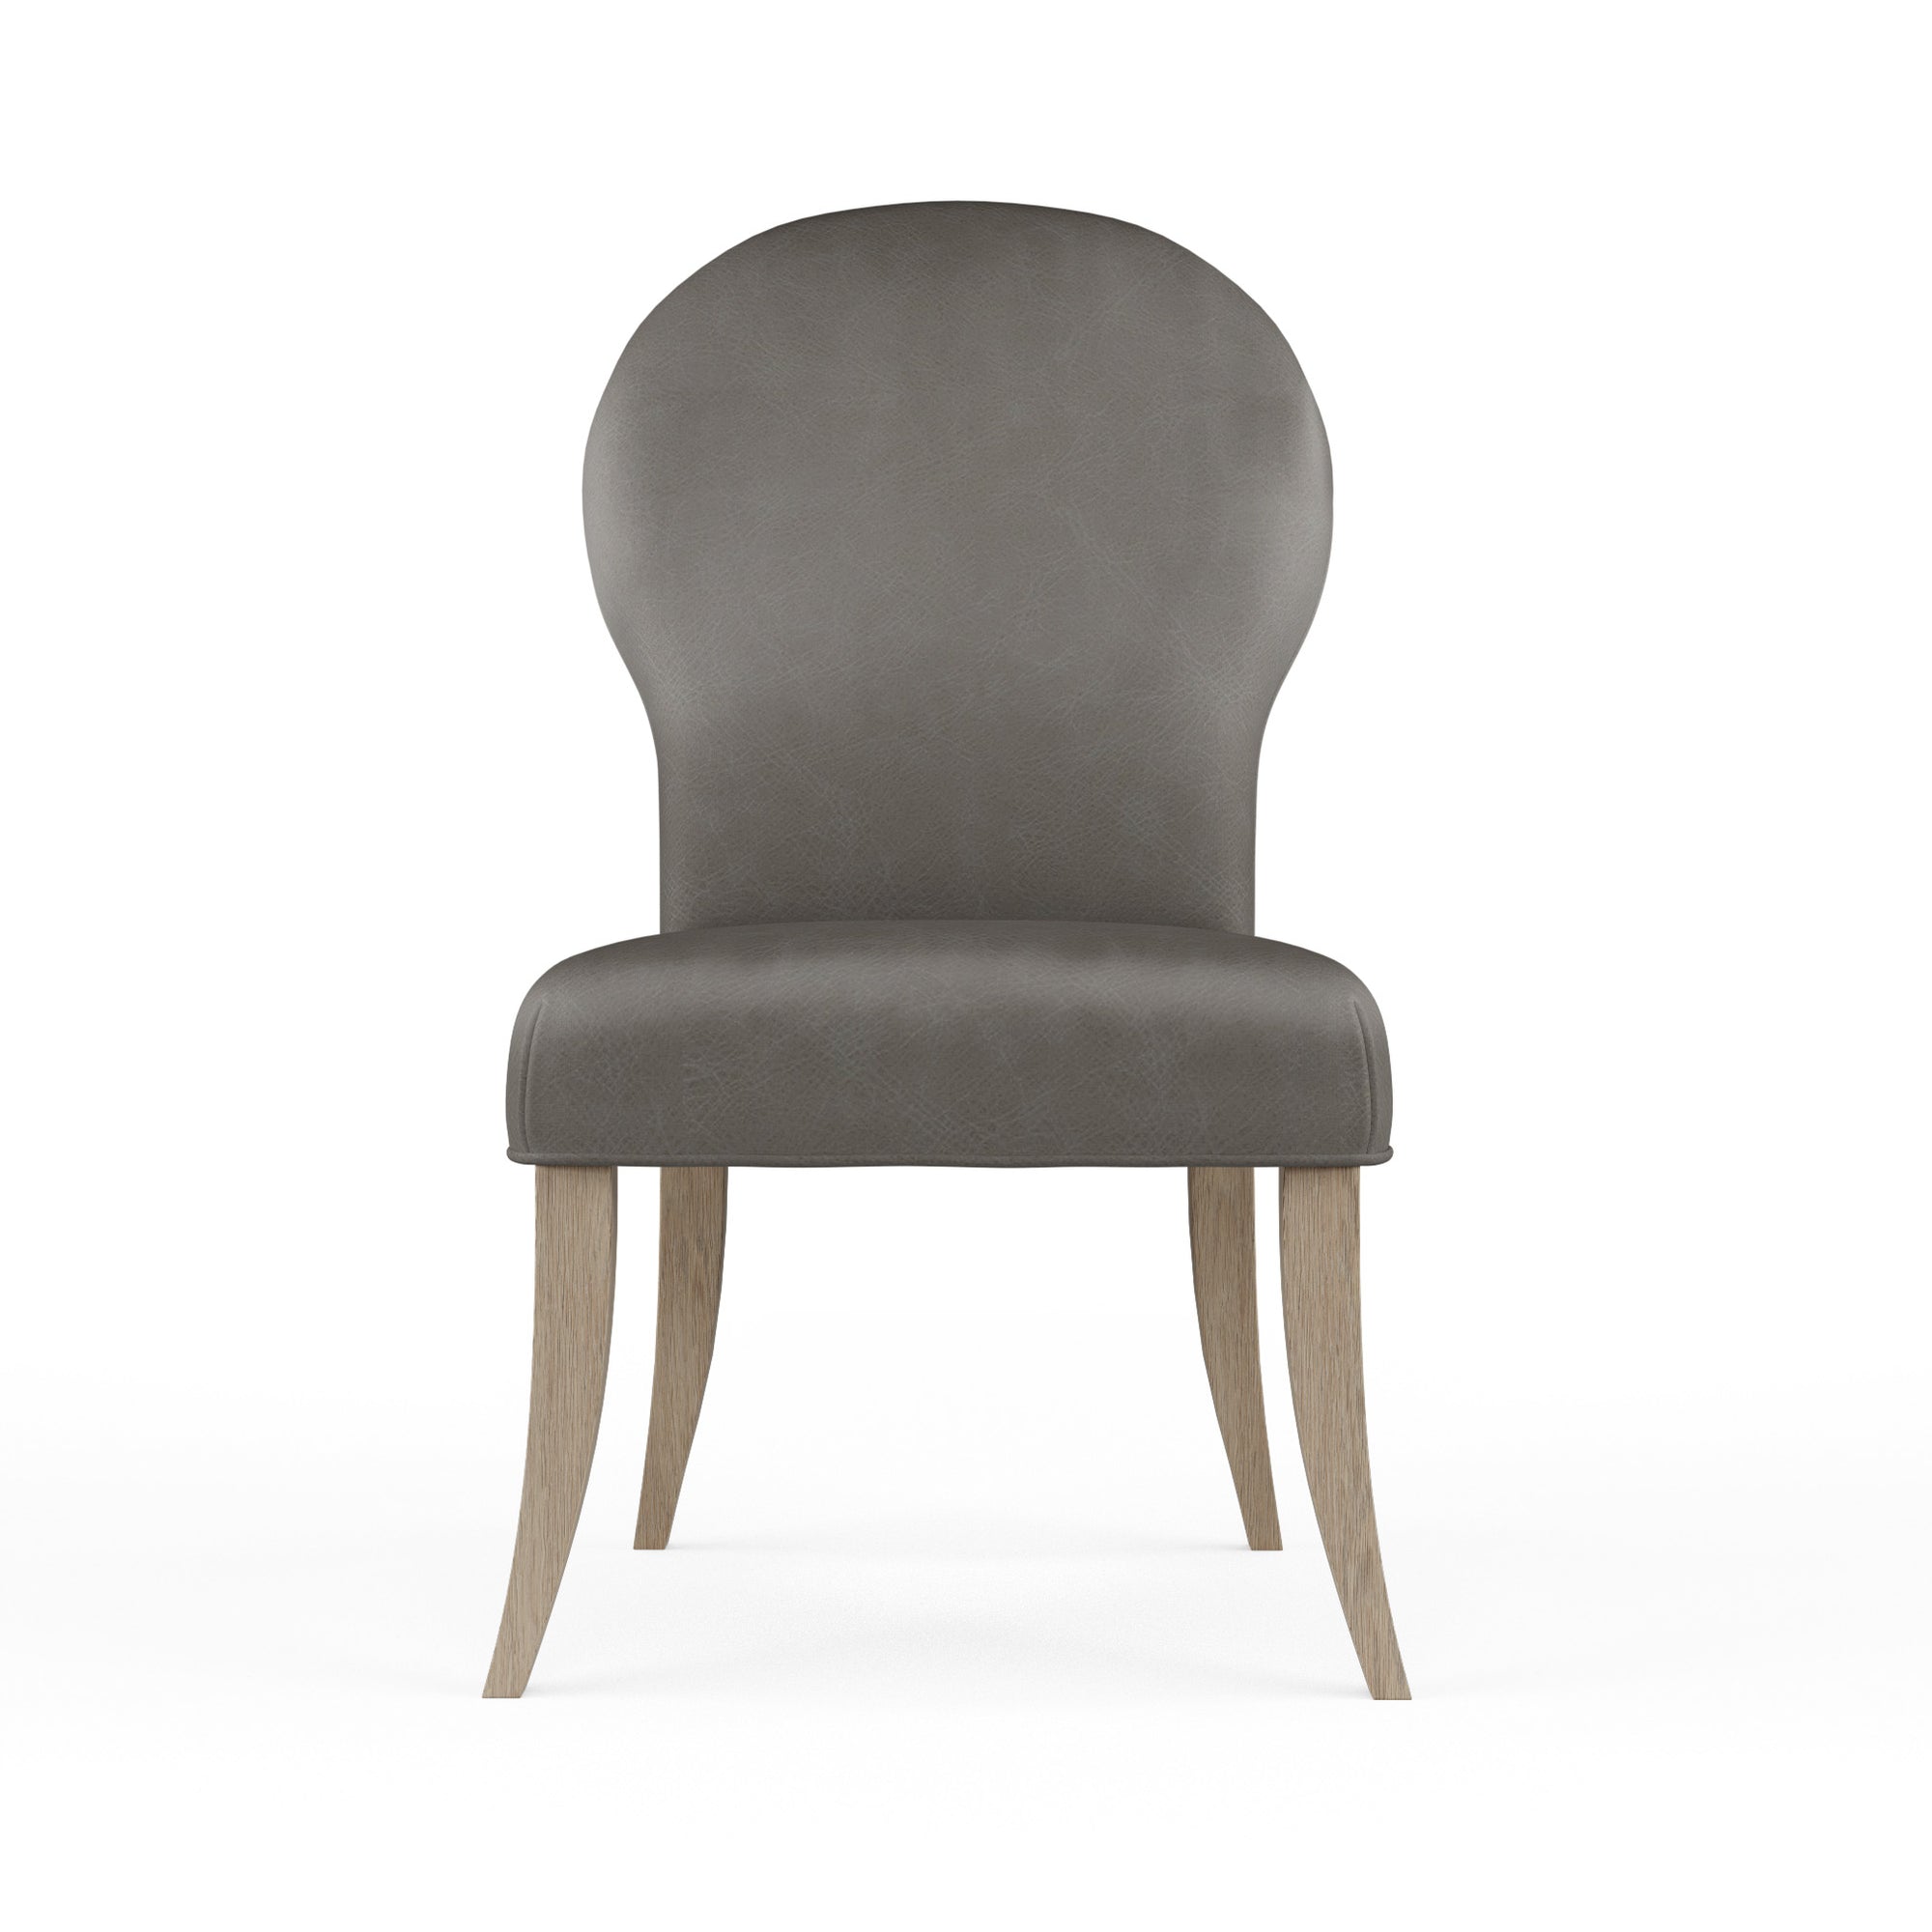 Caitlyn Dining Chair - Pumice Vintage Leather